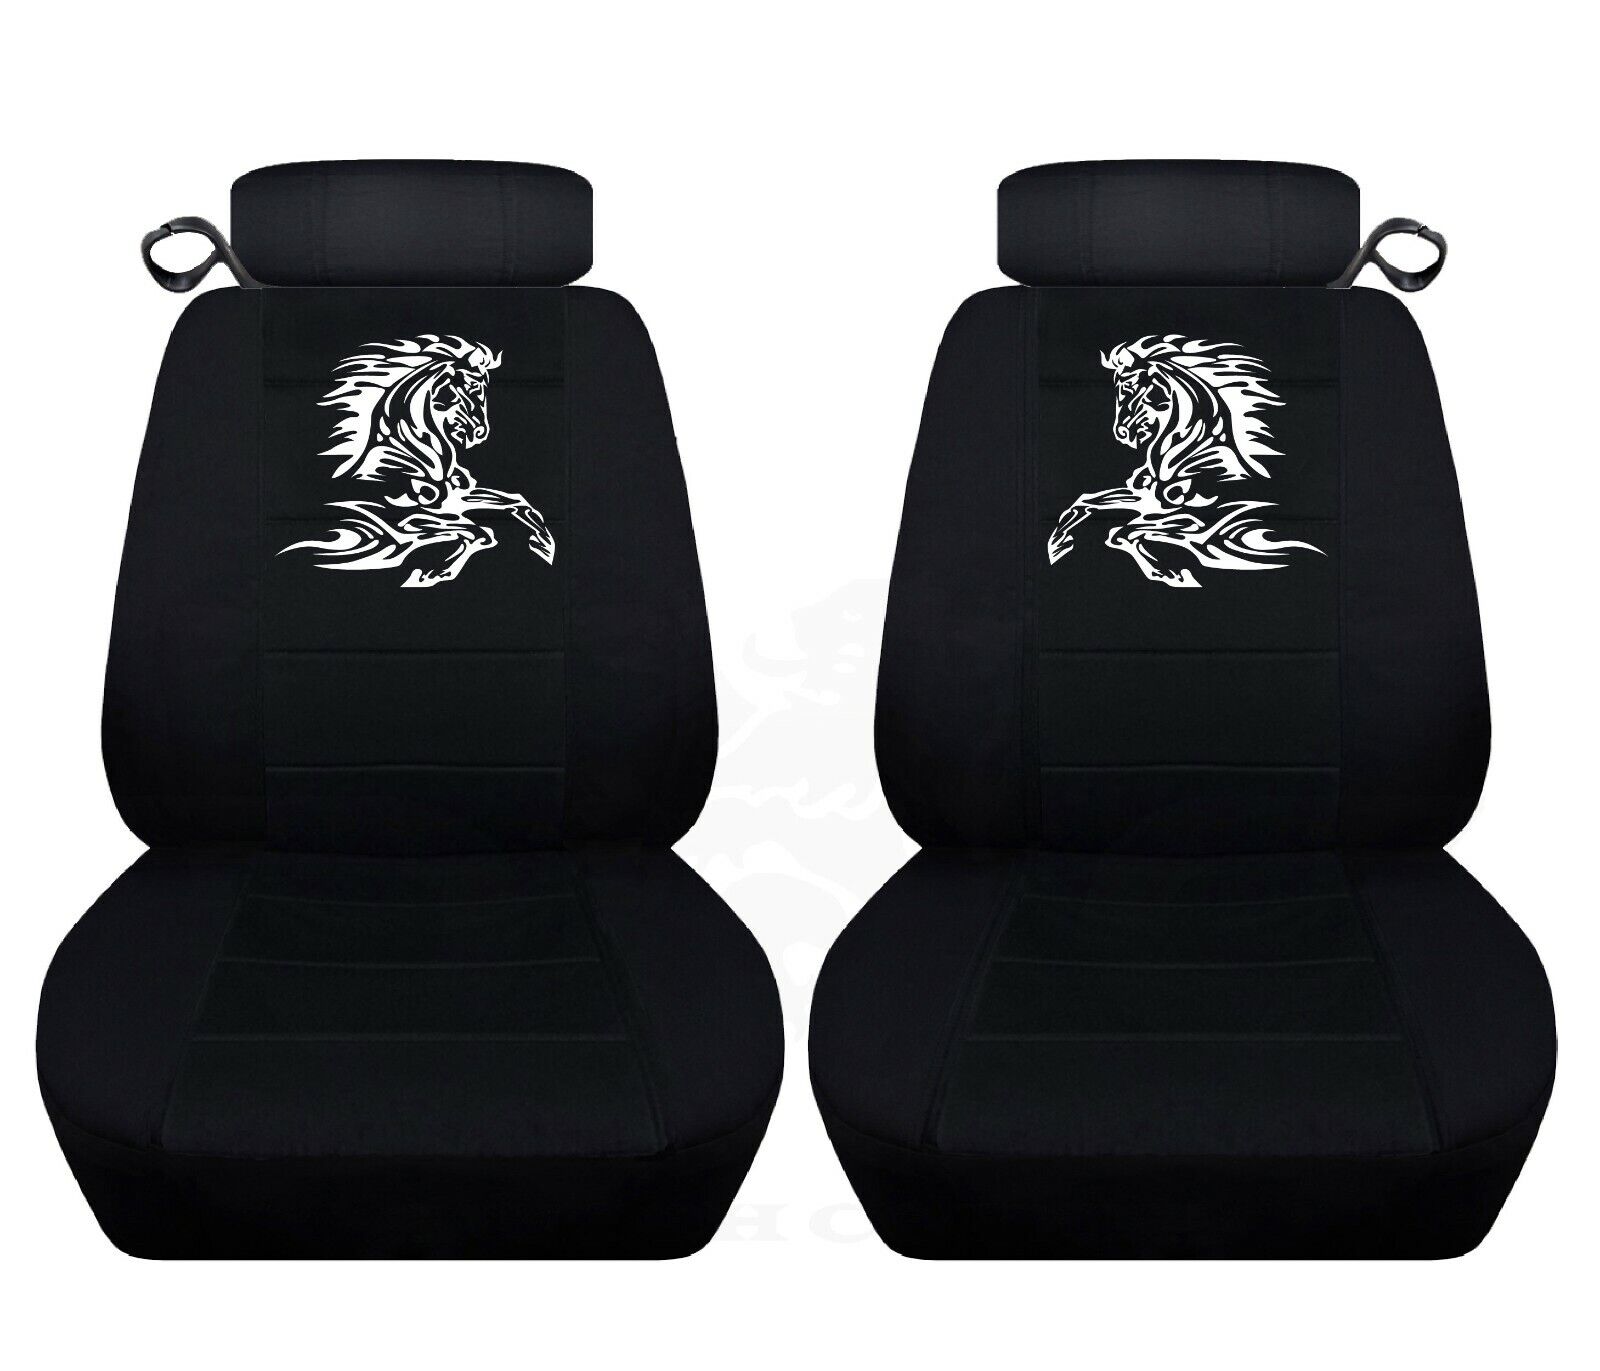 Car Seat Covers fits a 1994 to 2004 Ford Mustang -Tribal Horse Car Seat Covers